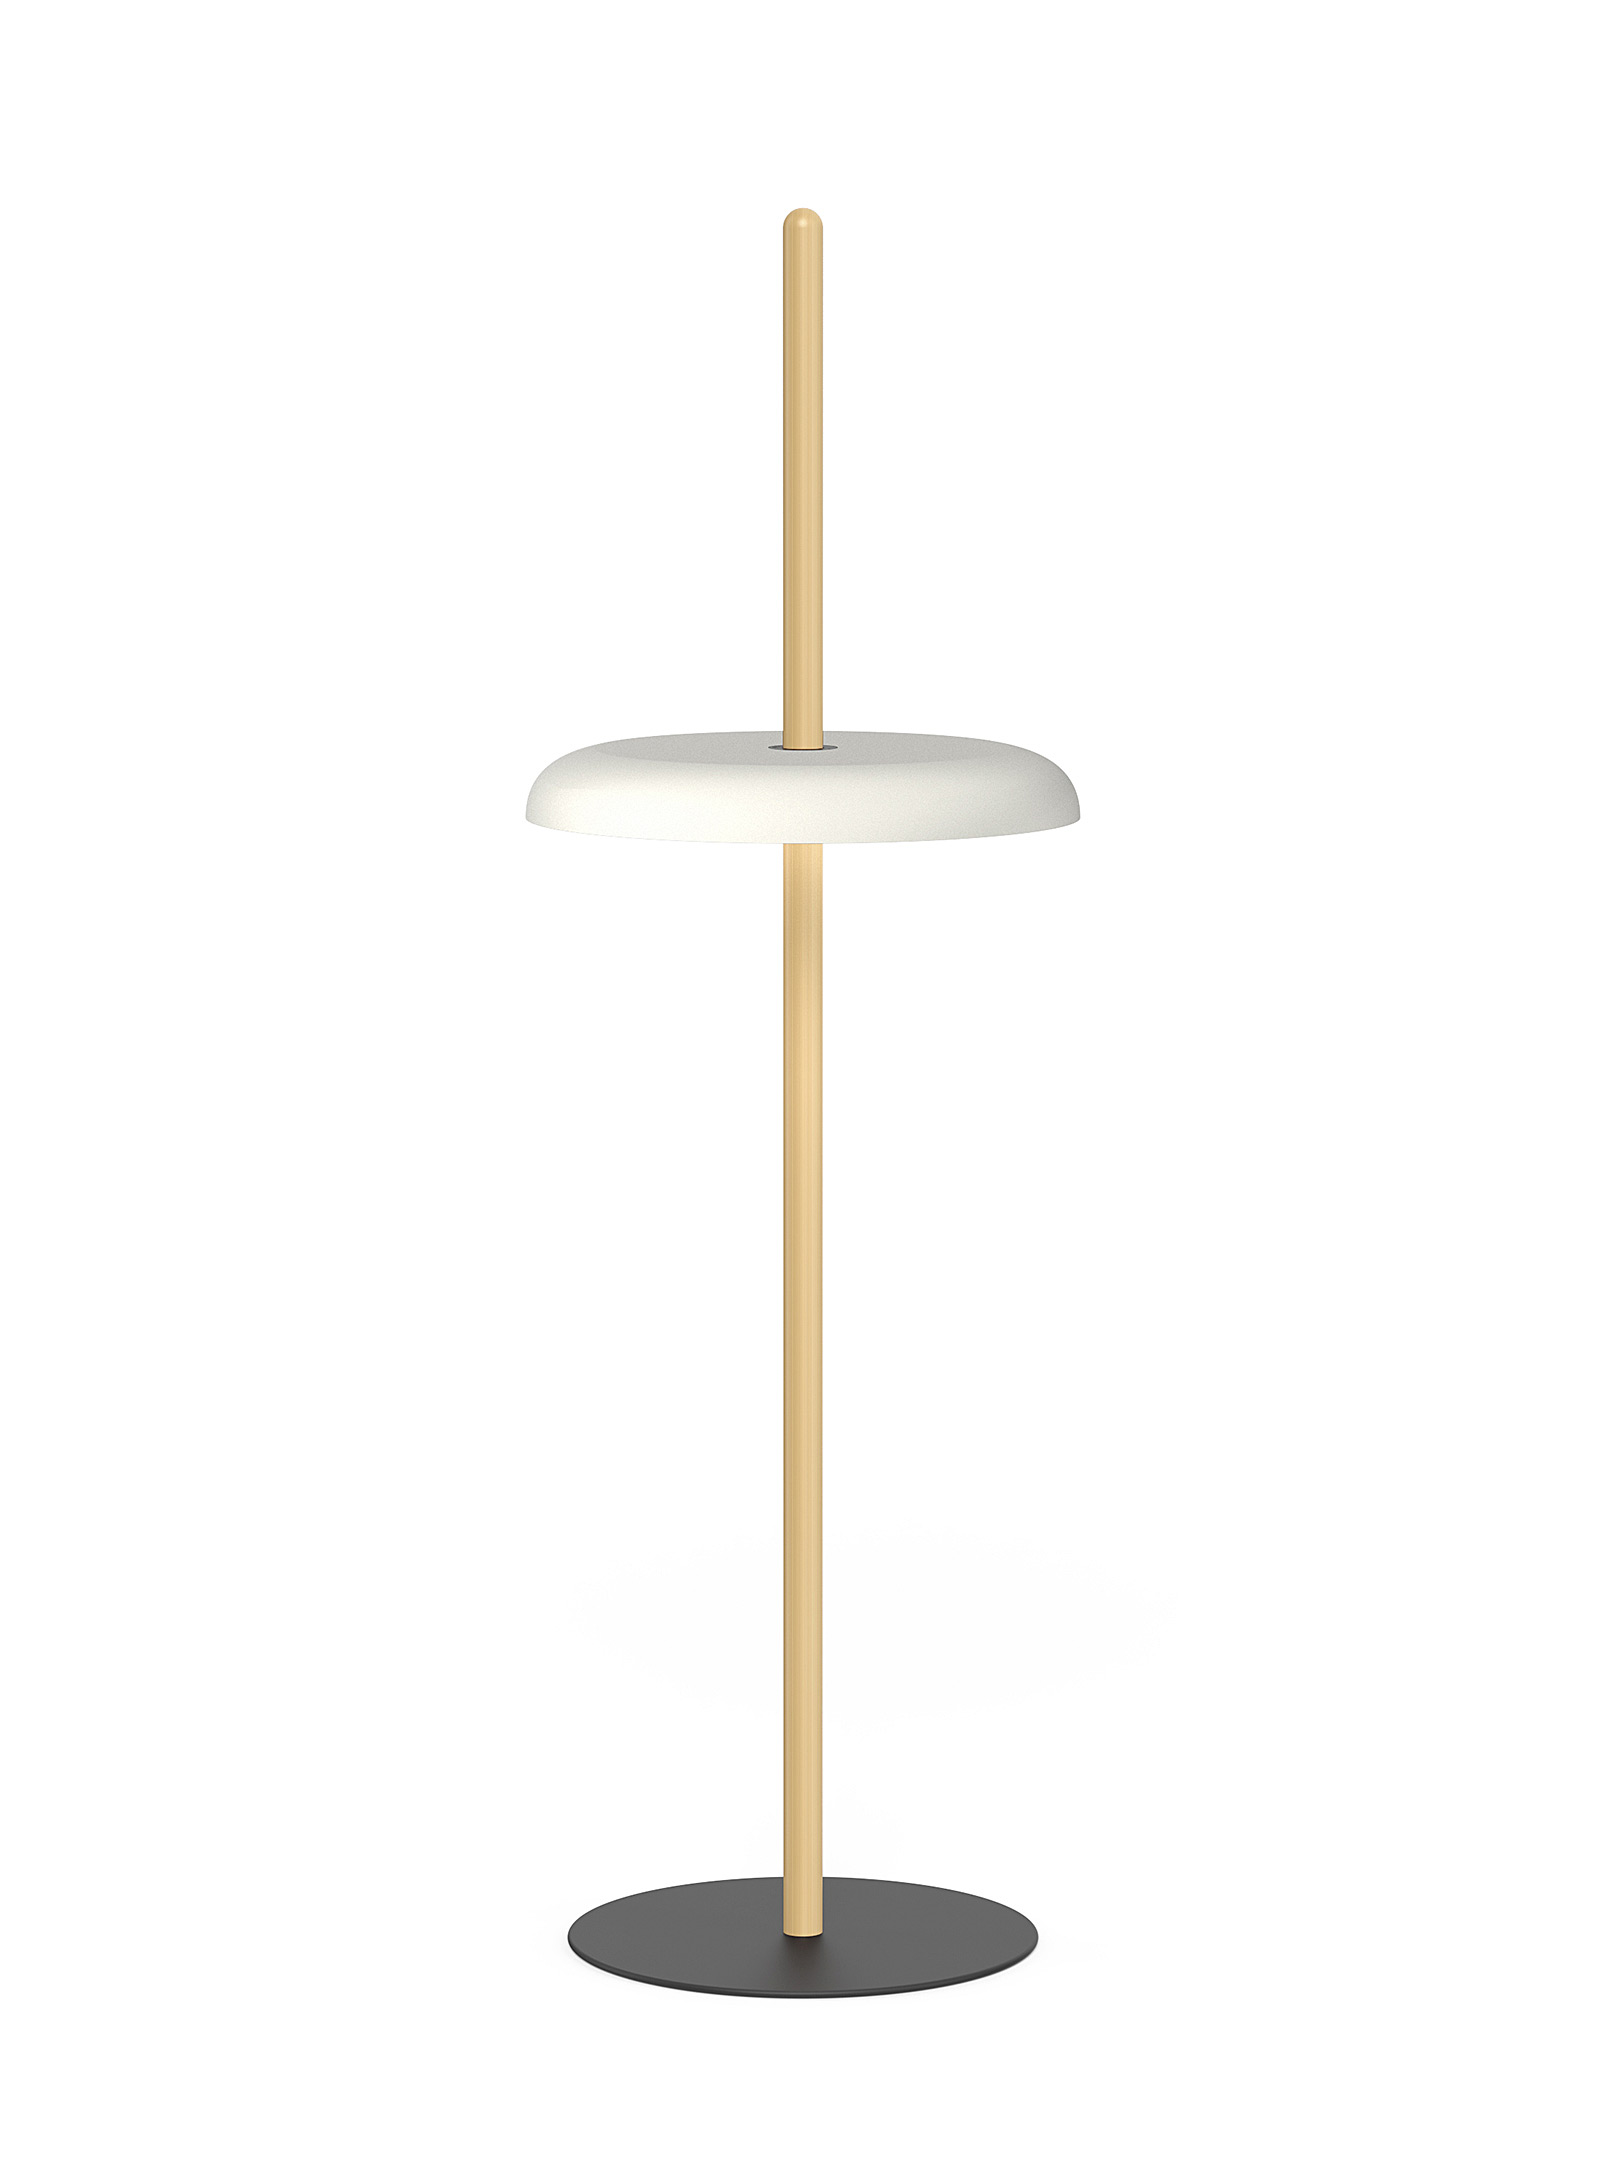 Pablo Designs Nivél Floor Lamp With Solid Oak Pole In White